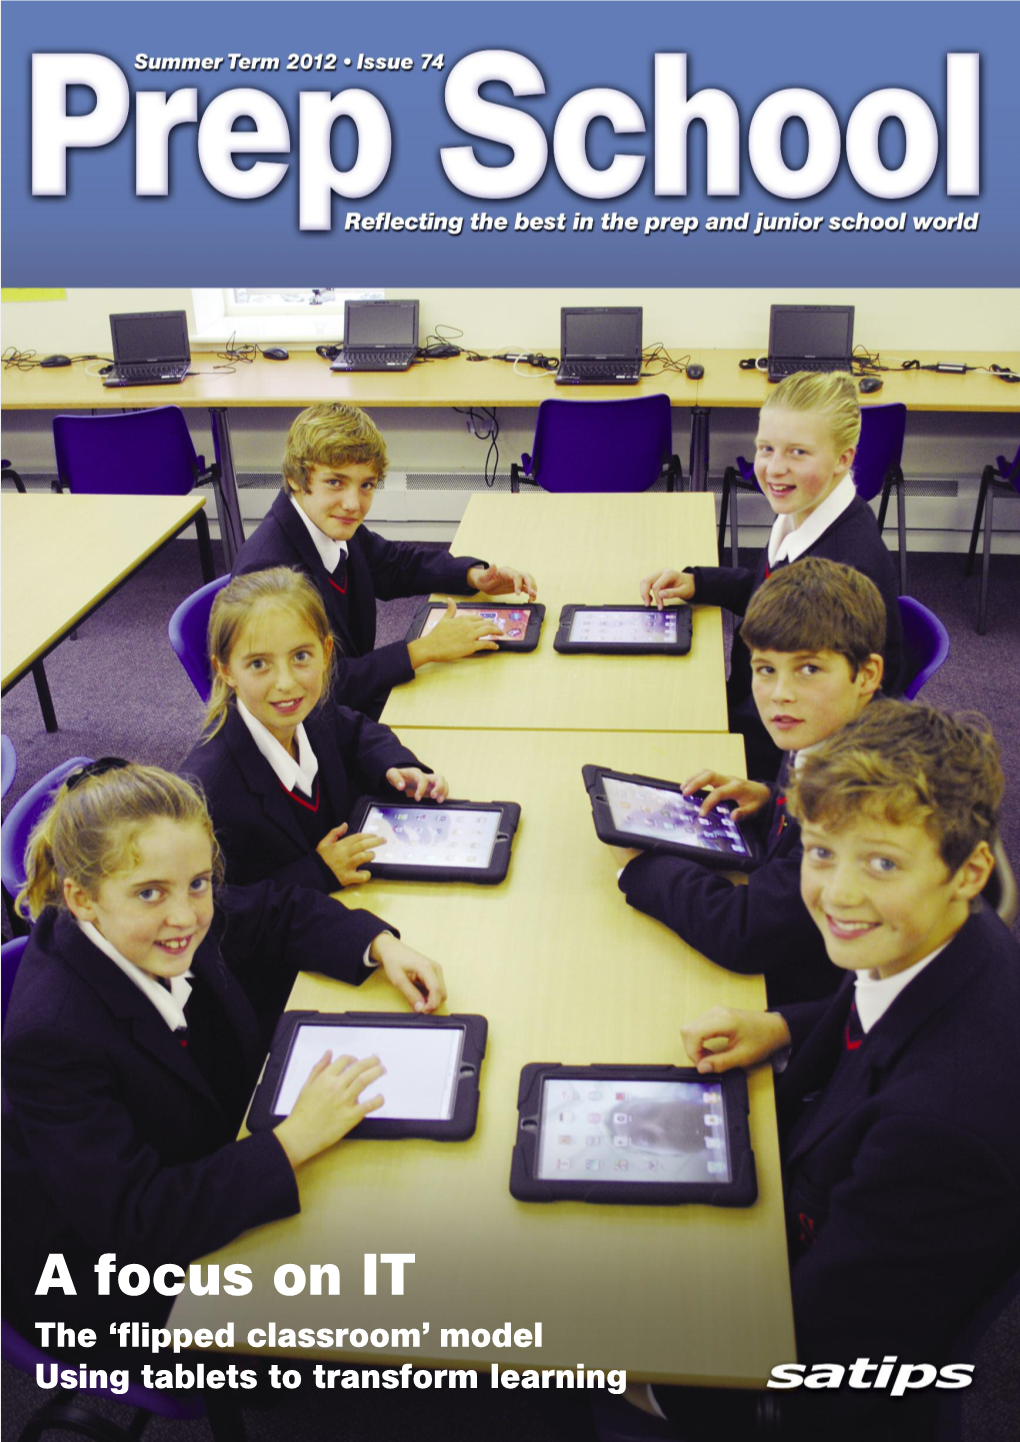 A Focus on IT the ‘Flipped Classroom’ Model Using Tablets to Transform Learning the INTERNATIONAL PRIMARY CURRICULUM Internationally-Minded, Inspiring Learning